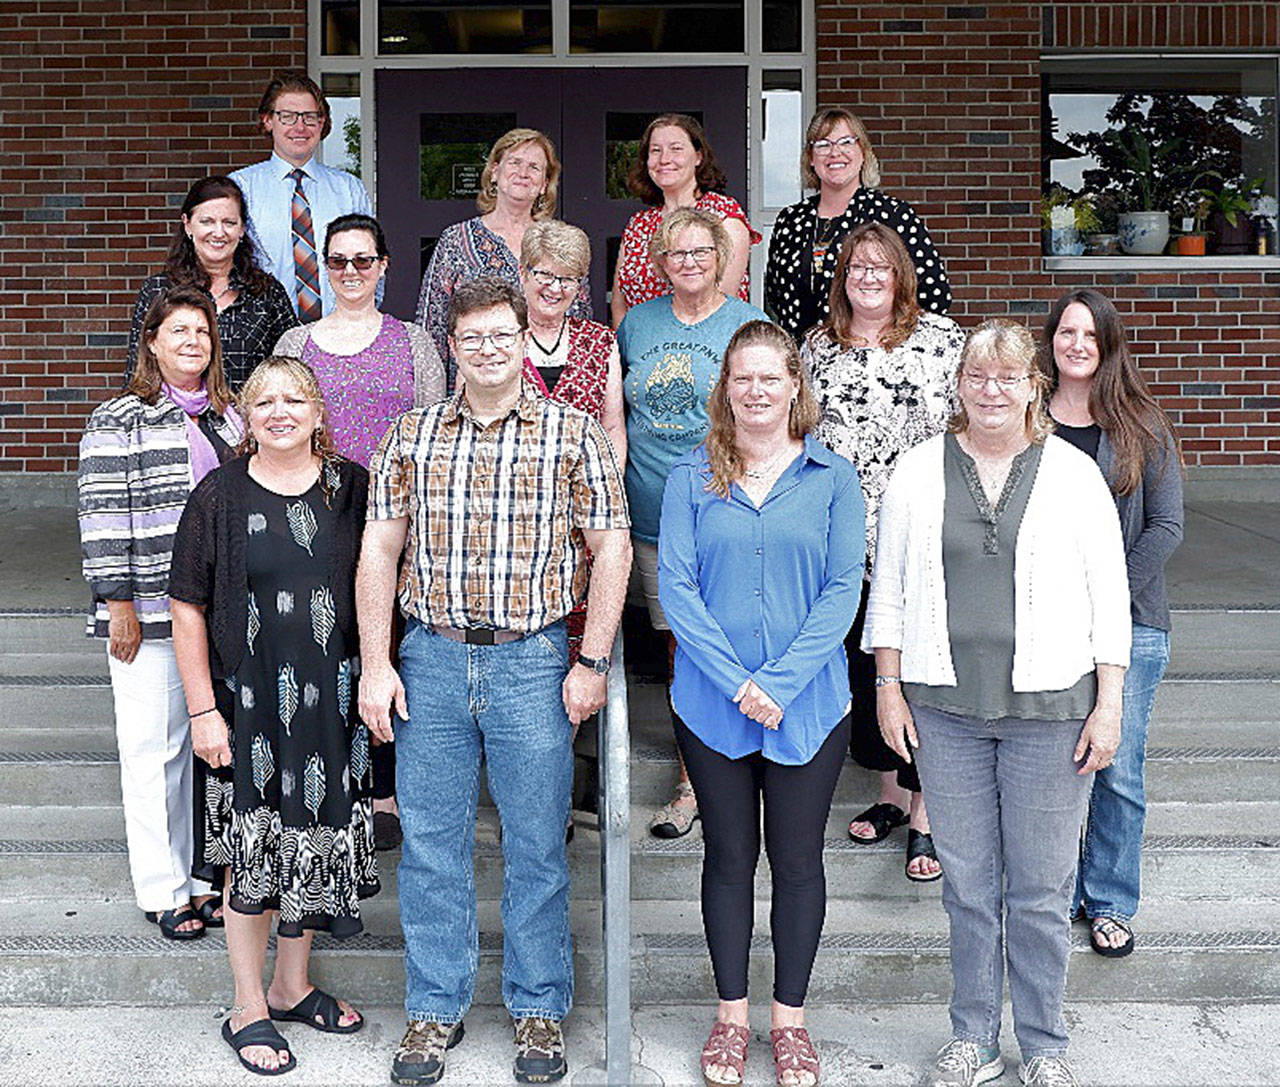 The Sequim School District welcomed a number of new teachers last week as the district prepares for the first day of school on Wednesday, Sept. 4. Pictured are (back row, from left) Natalie Fortier (Greywolf Elementary School), Konstantin Semerikov (Sequim Middle School), Melissa Dempsey (SMS), Cheryl Gardner (Greywolf) and Kylie Douglas (Greywolf), (middle row, from left) training facilitator Pam Landoni with Lisa Beaver Williams (Helen Haller Elementary School), Linda DeIvernois (Sequim High School), Mary Himley (Helen Haller), Saxon Holt (Helen Haller) and Kami Sorensen (Greywolf), with (front row, from left) Denise Dahll (Sequim High), Keith Lee (Helen Haller), Kristin Mooney (Helen Haller) and Jennifer Lane (Greywolf). Photo courtesy of Sequim School District